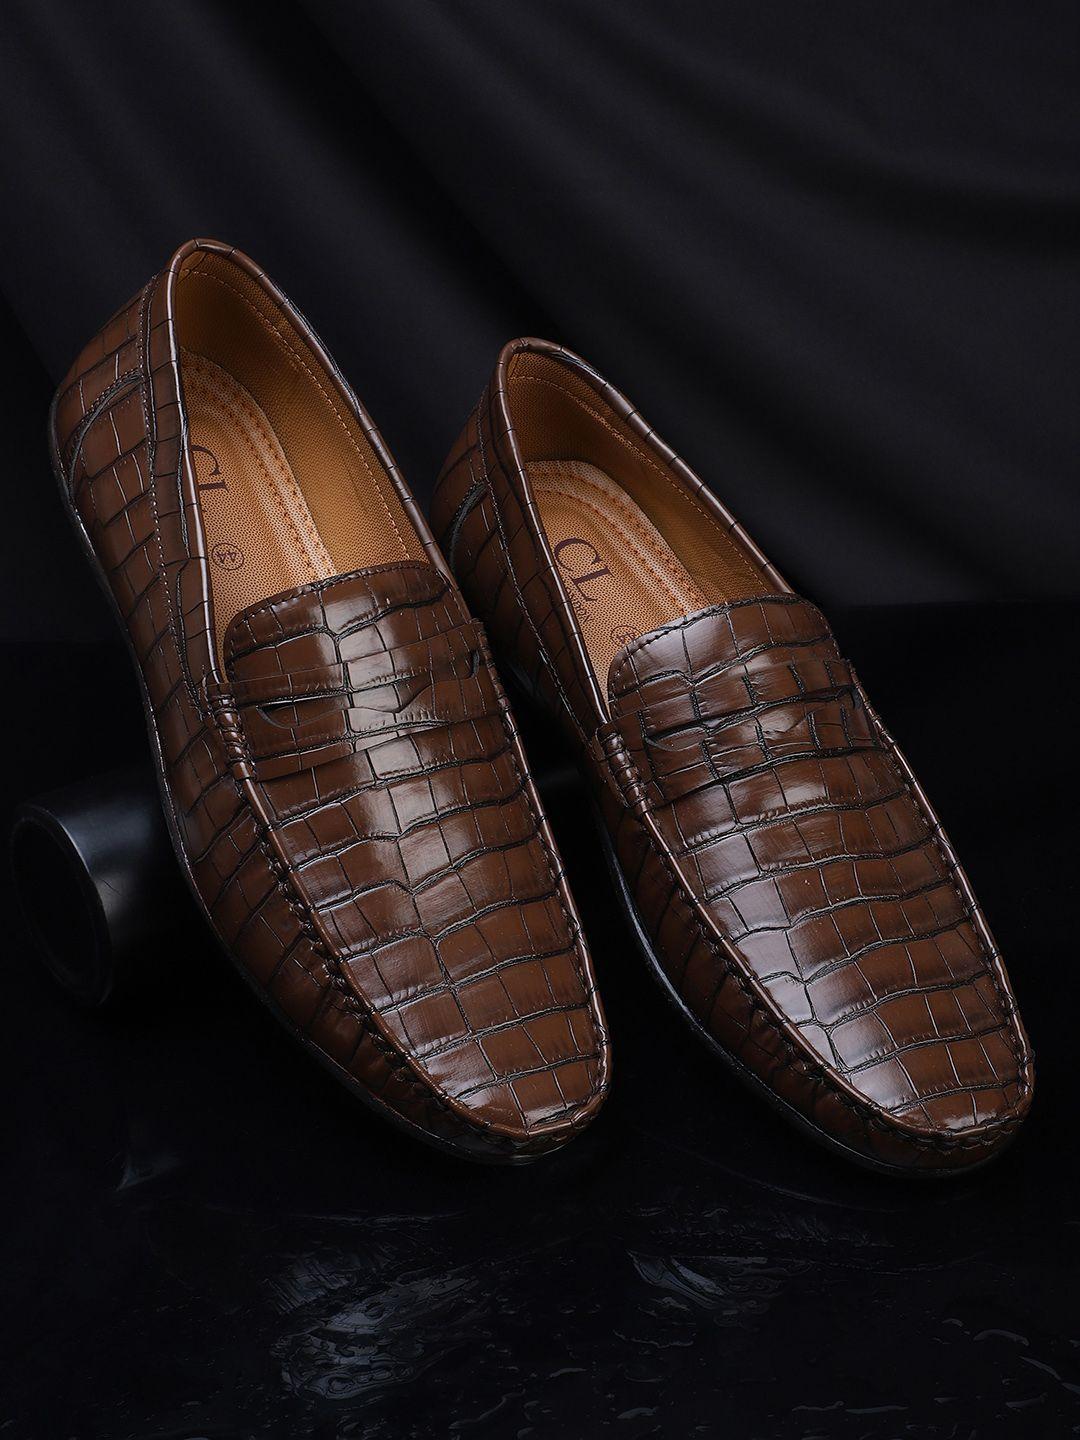 carlton london men brown textured casual loafers